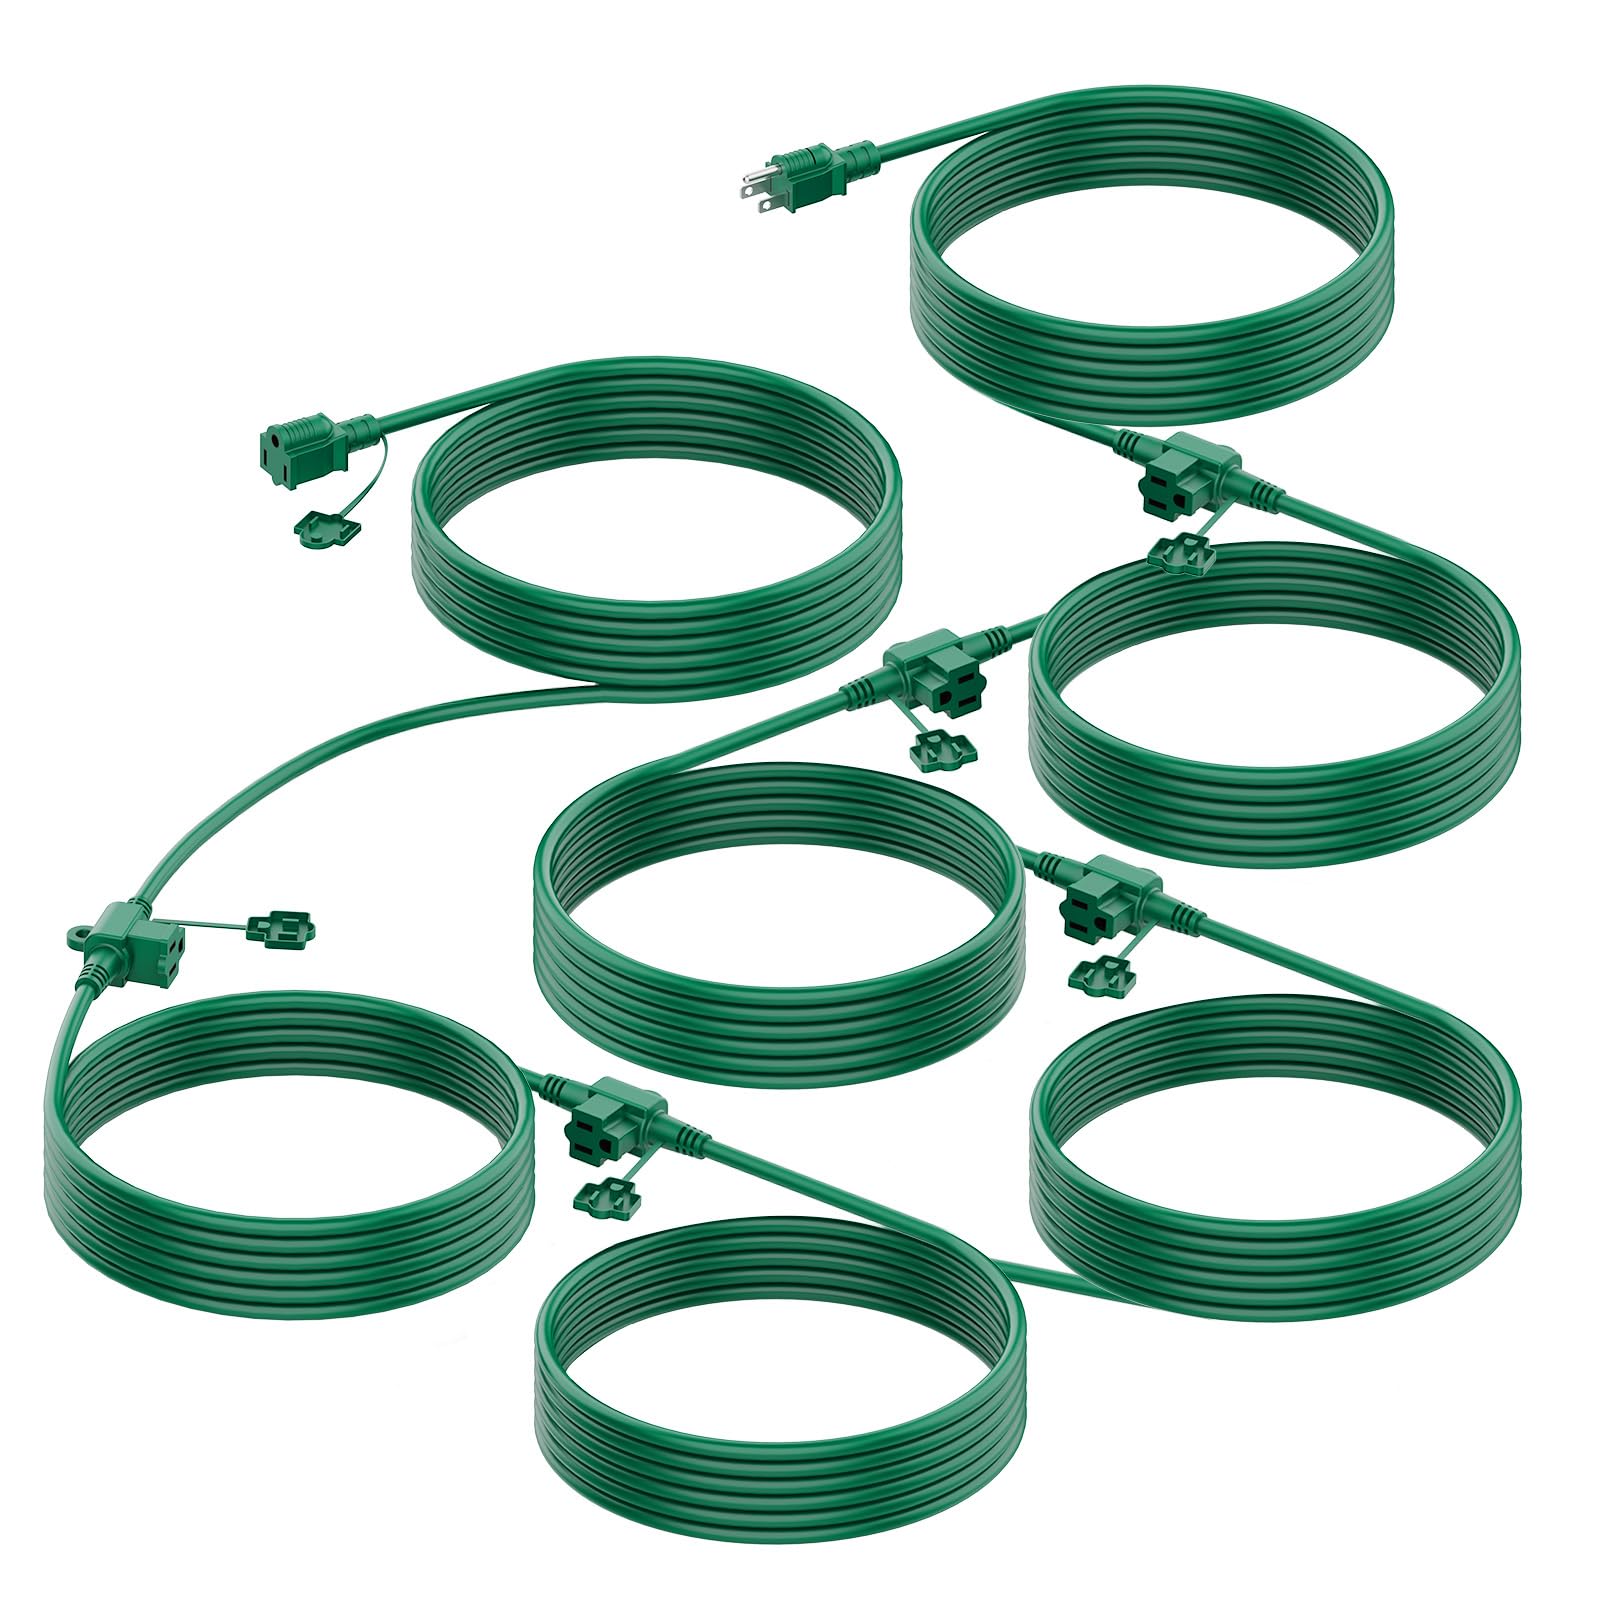 50 FT / 6 Outlets / Green